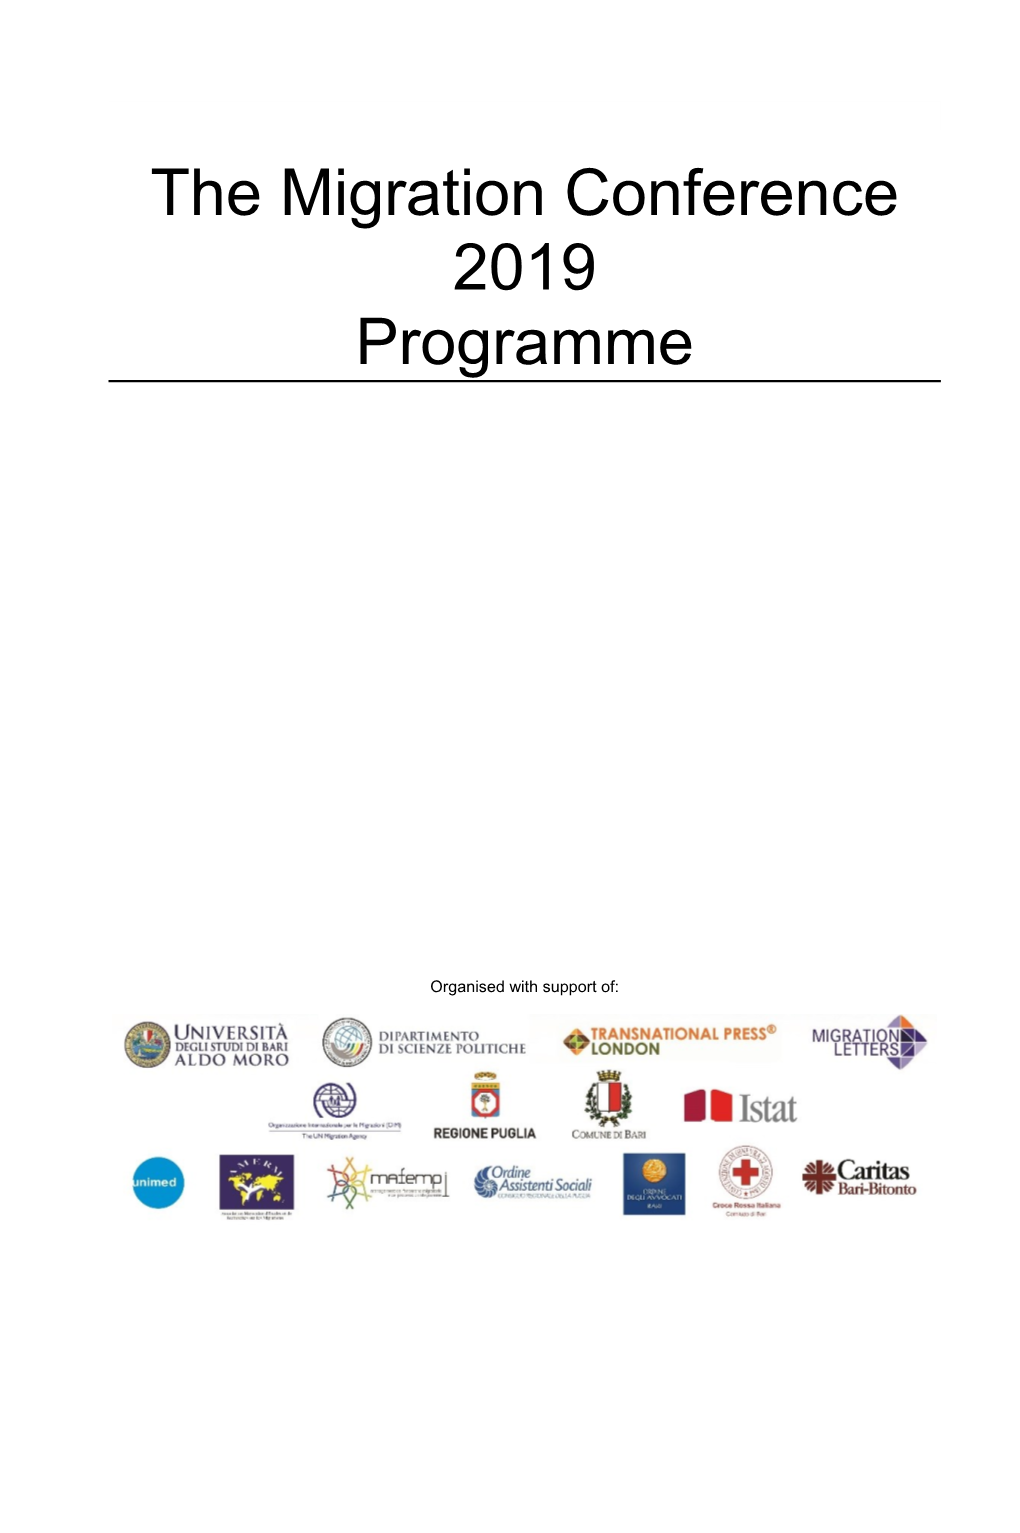 The Migration Conference 2019 Programme